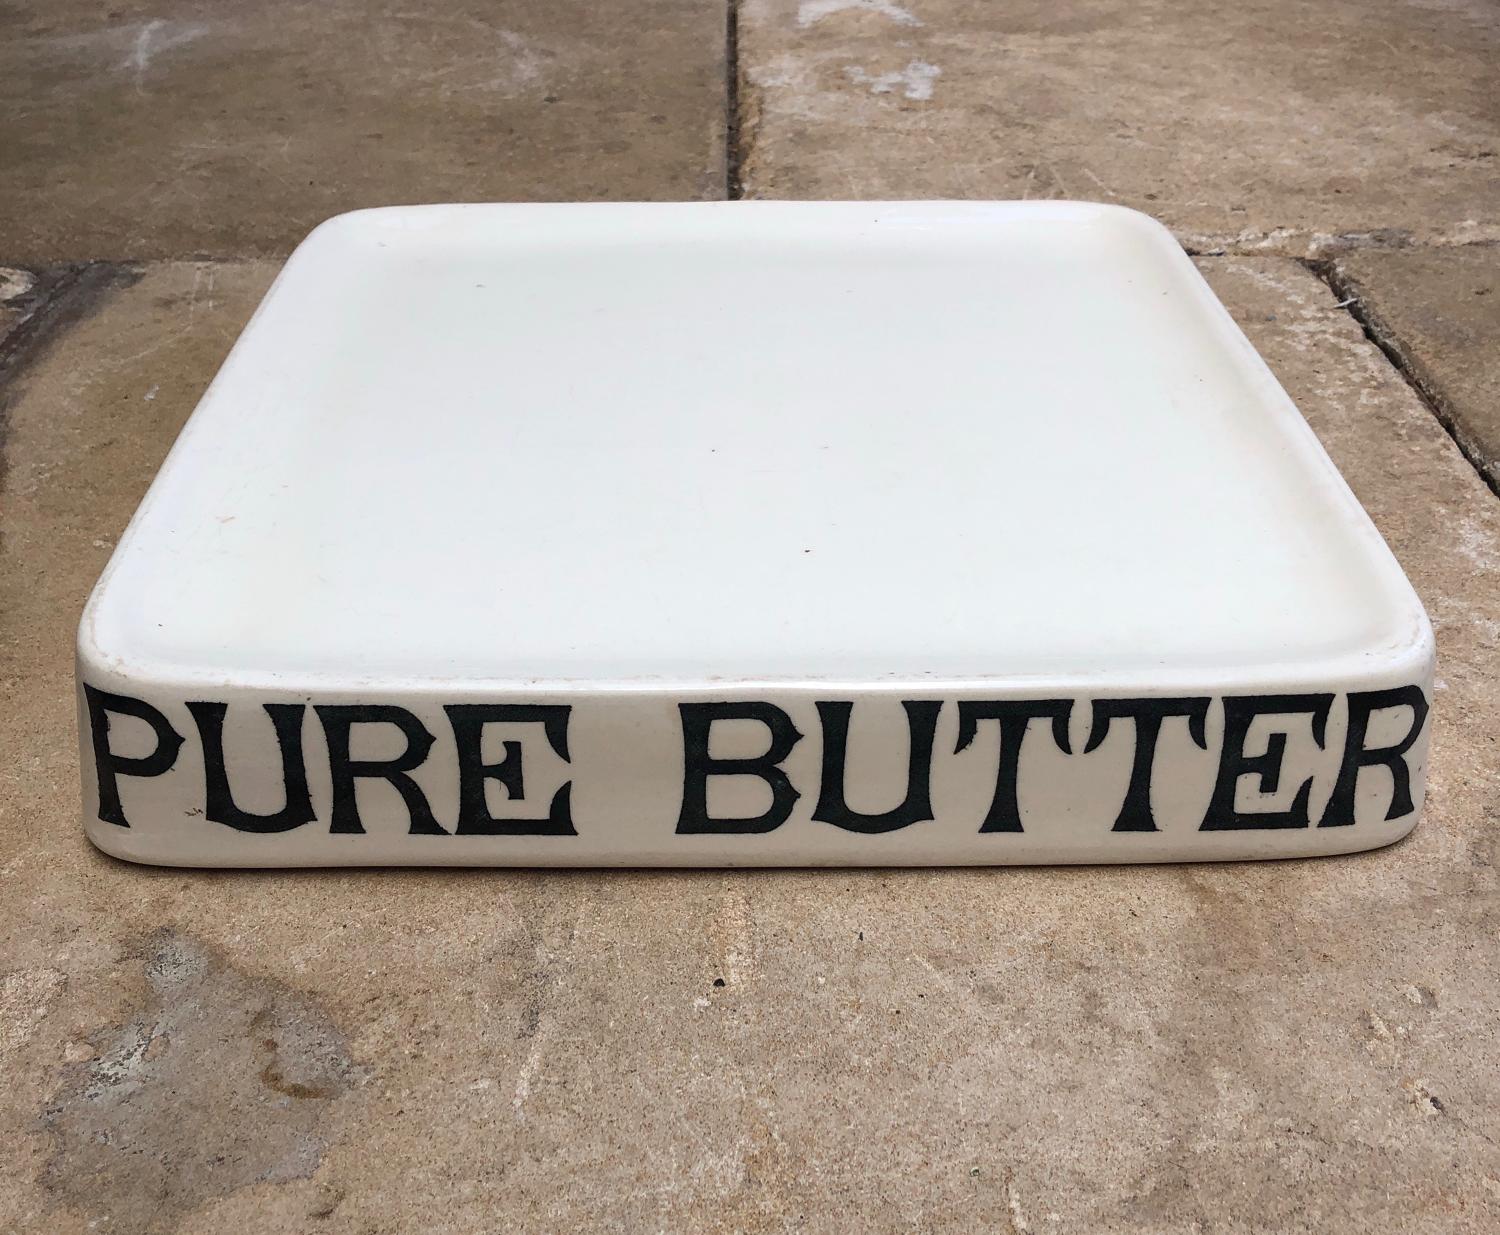 Superb Edwardian Grocers or Dairys White Ironstone Slab - Pure Butter